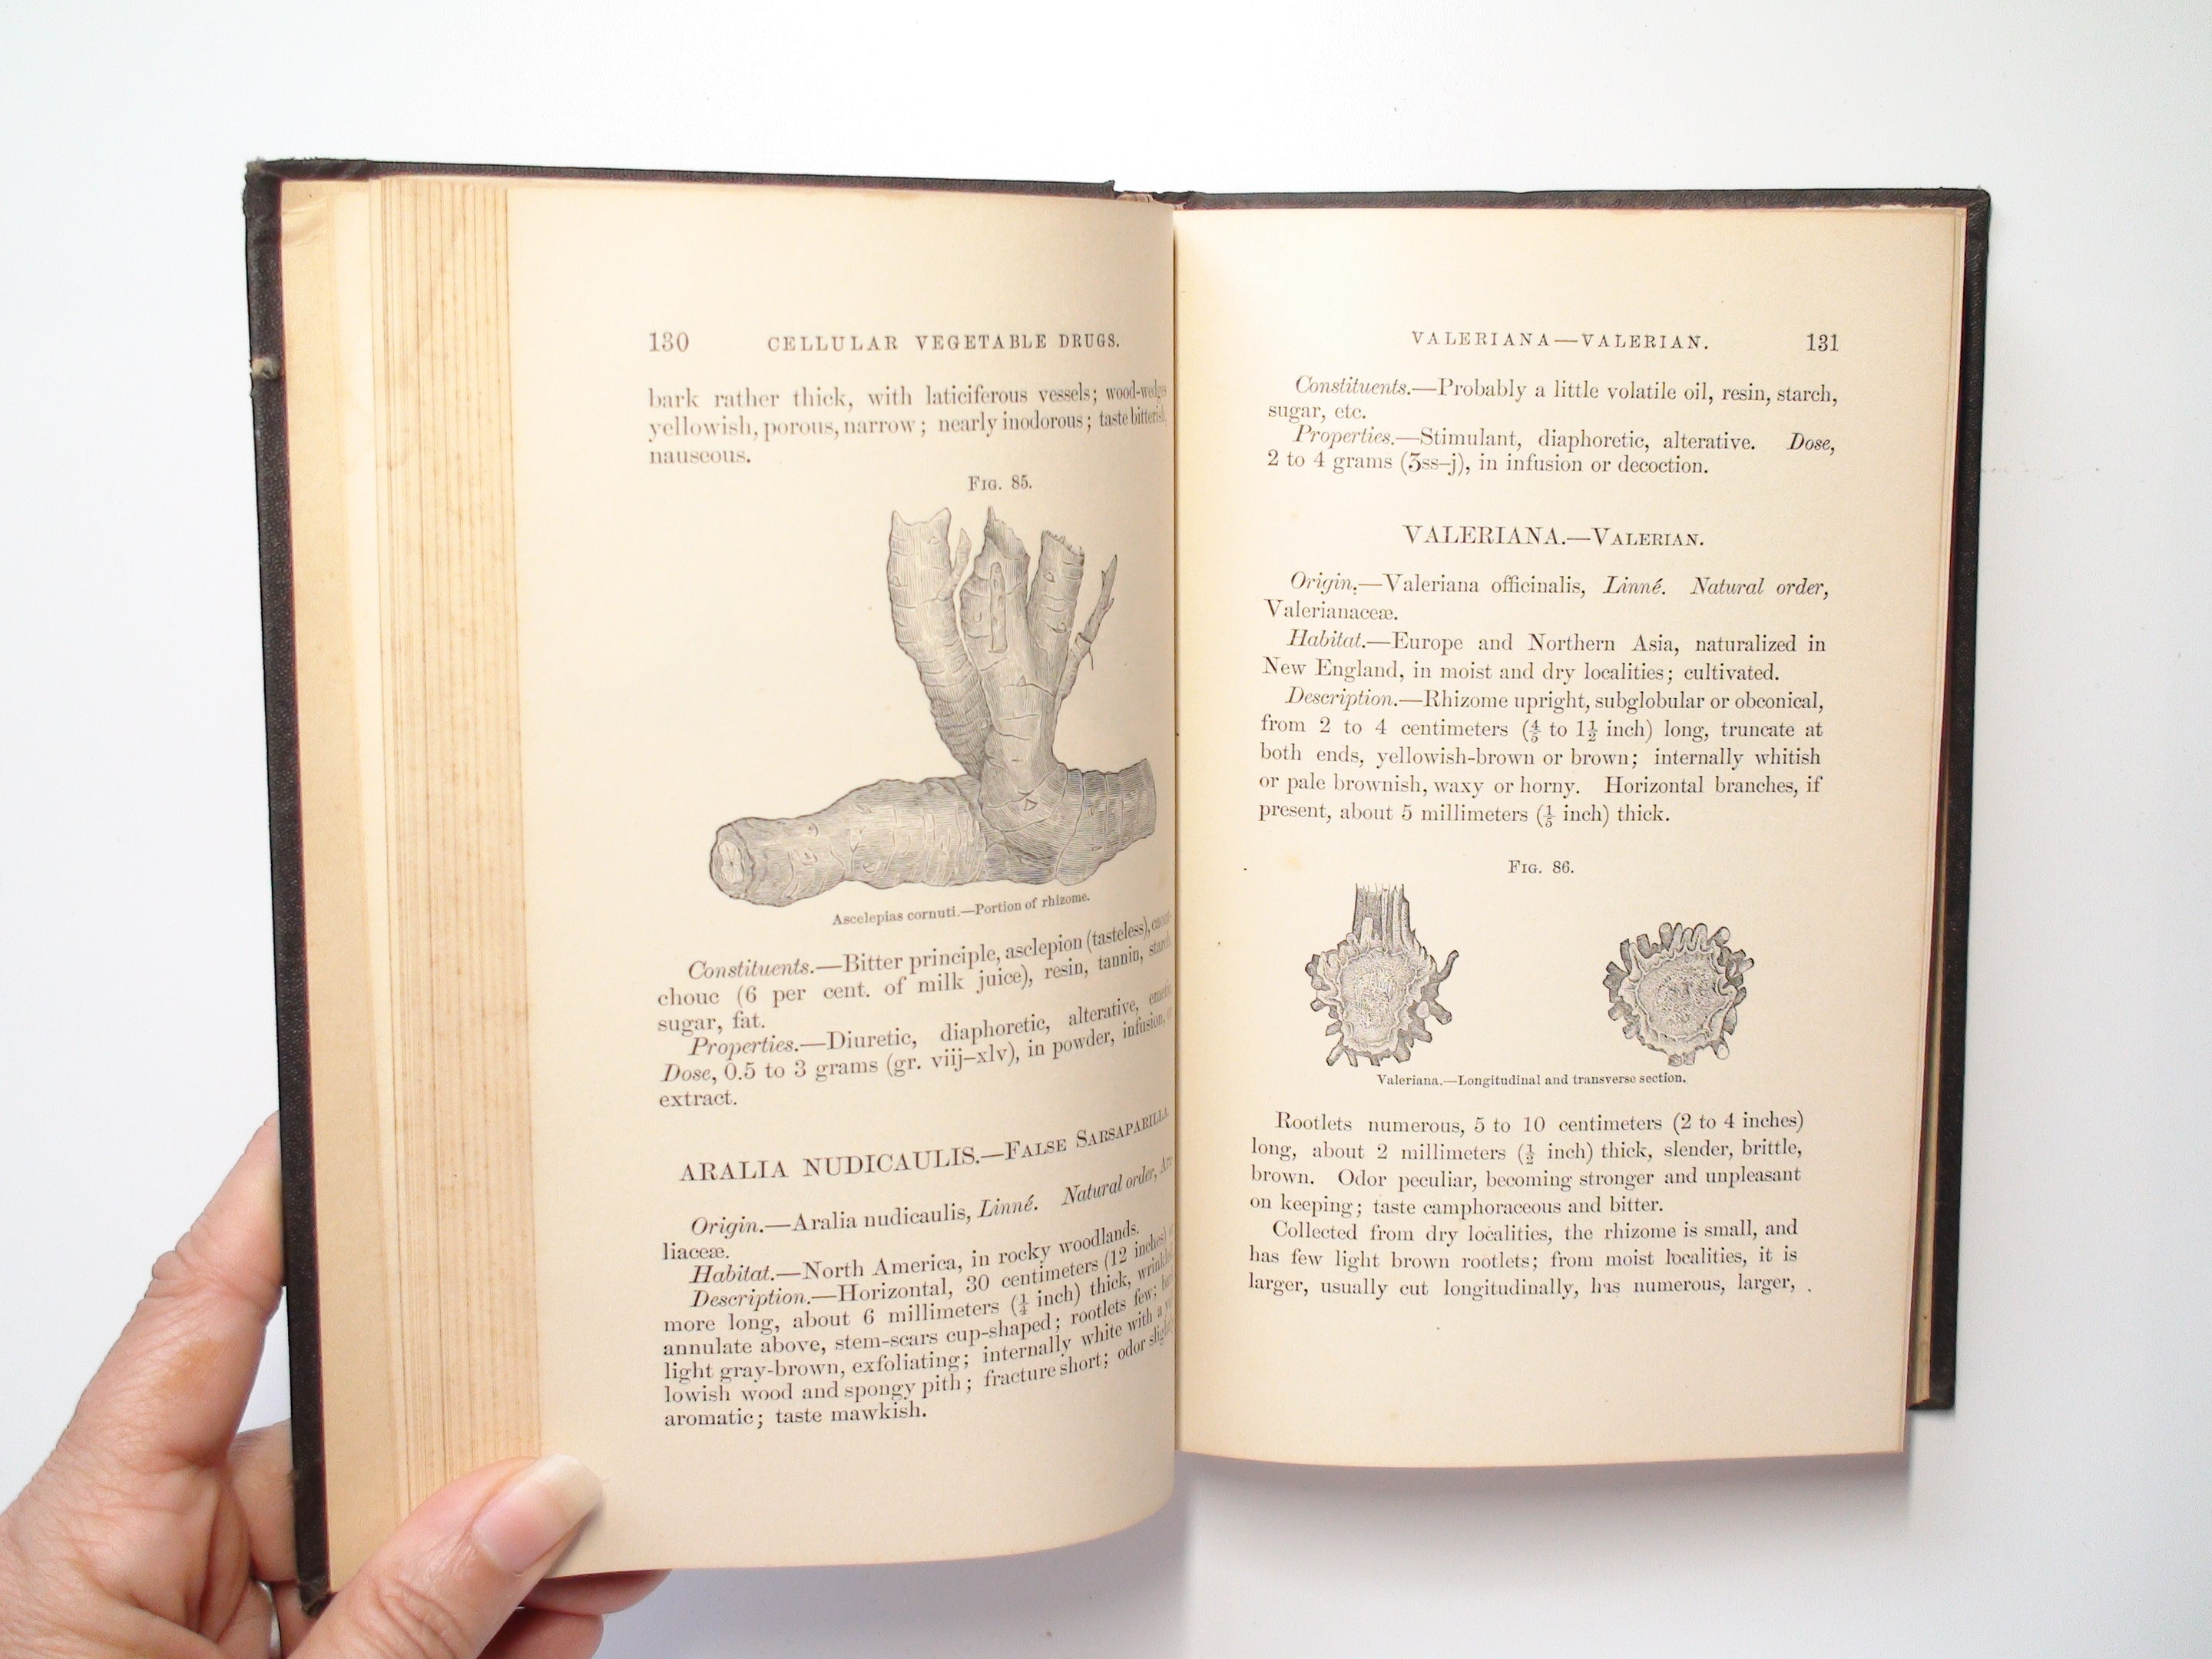 A Manual of Organic Materia Medica, by John M. Maisch, 3rd Ed, Illustrated, 1887